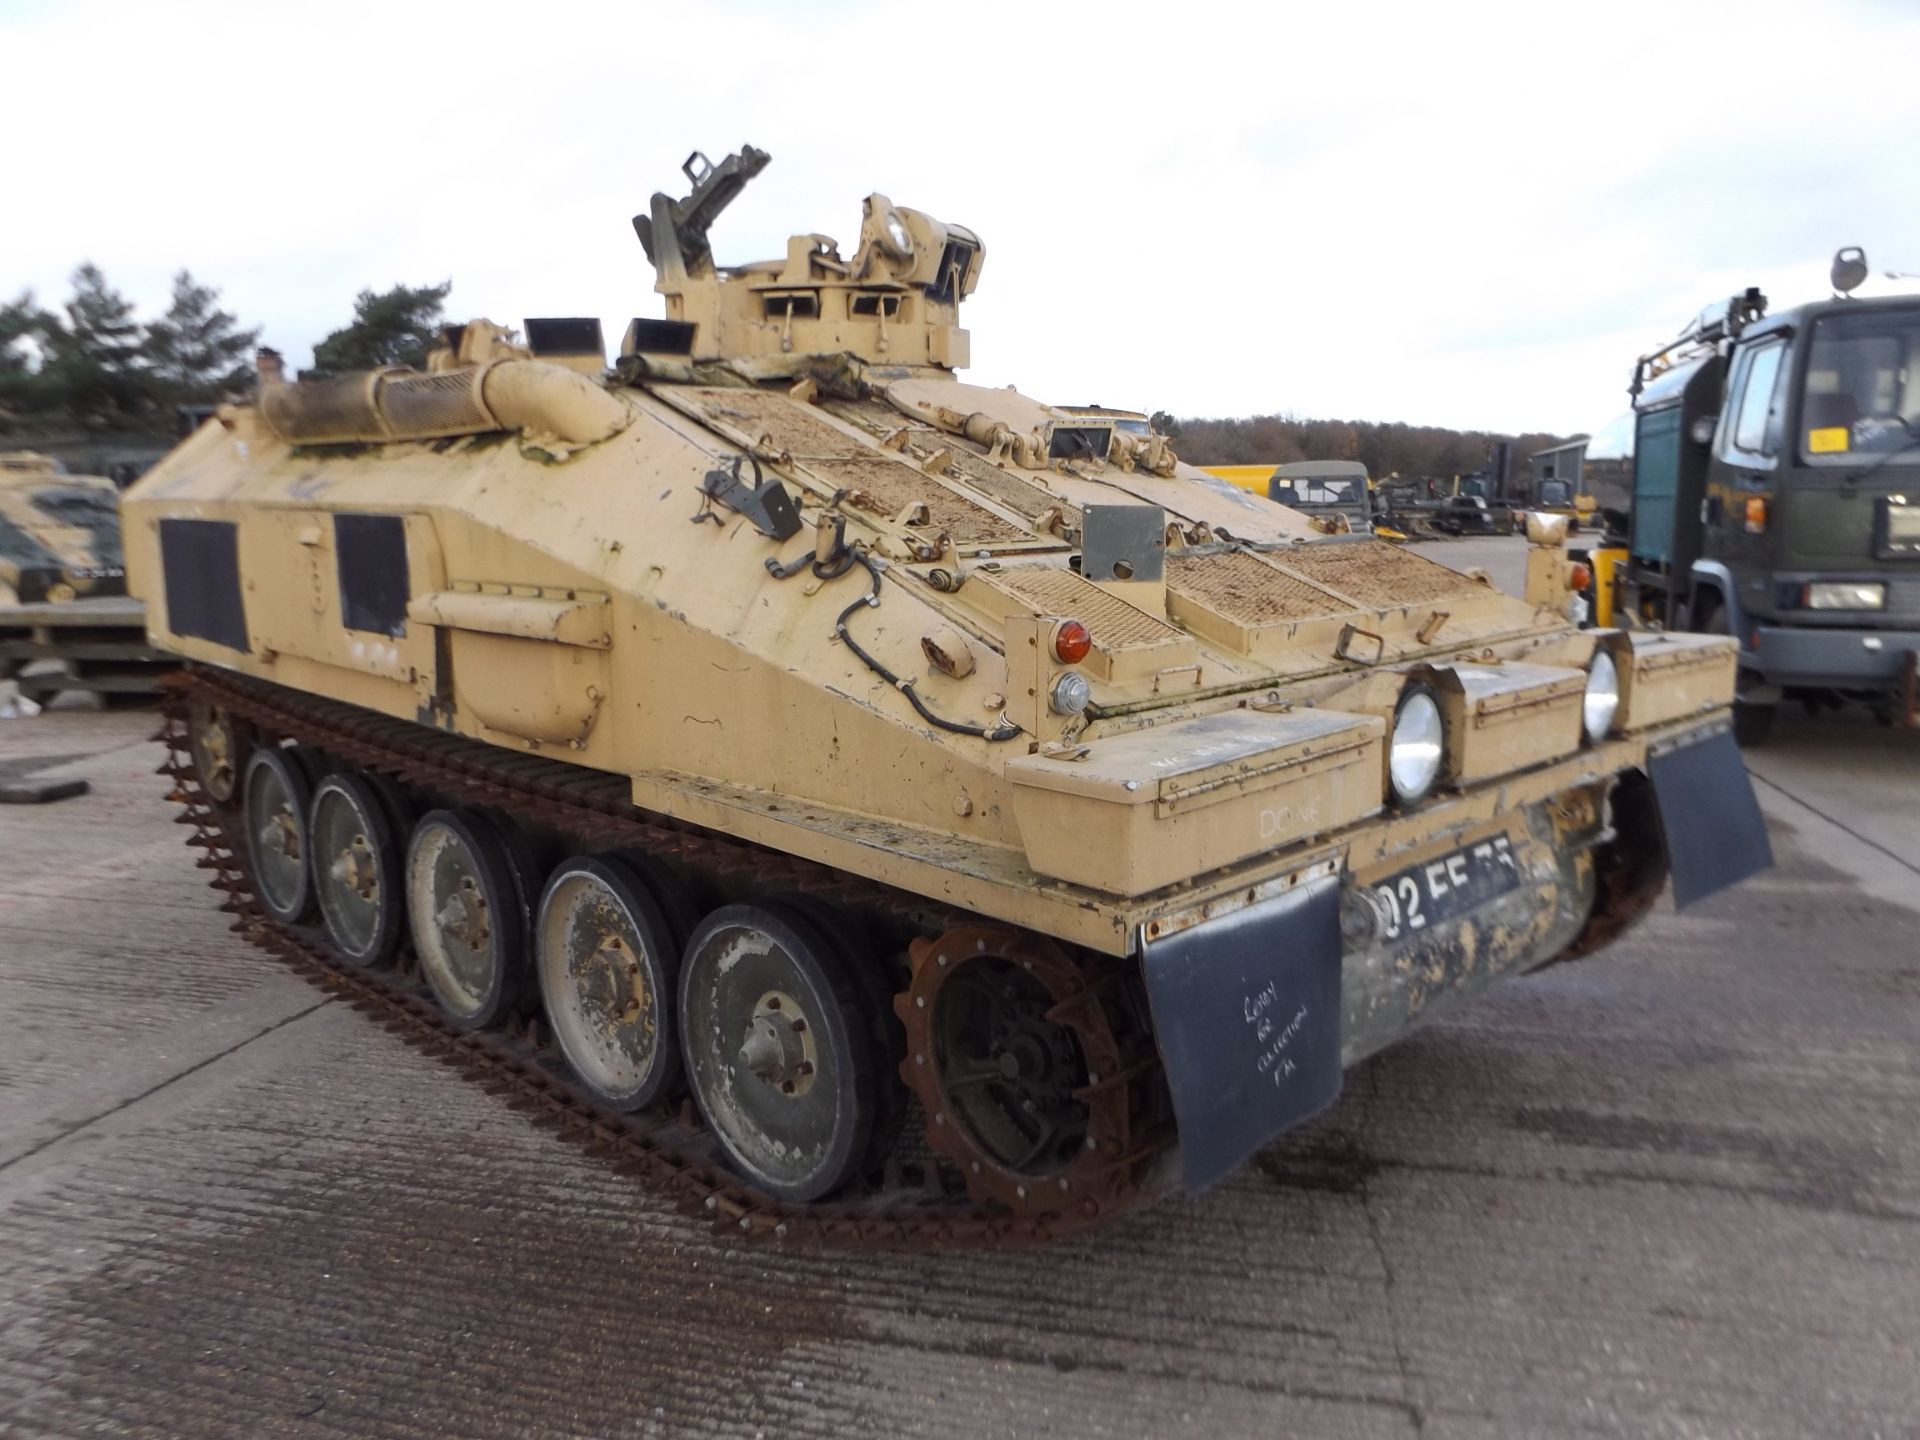 Dieselised CVRT (Combat Vehicle Reconnaissance Tracked) Spartan Armoured Personnel Carrier